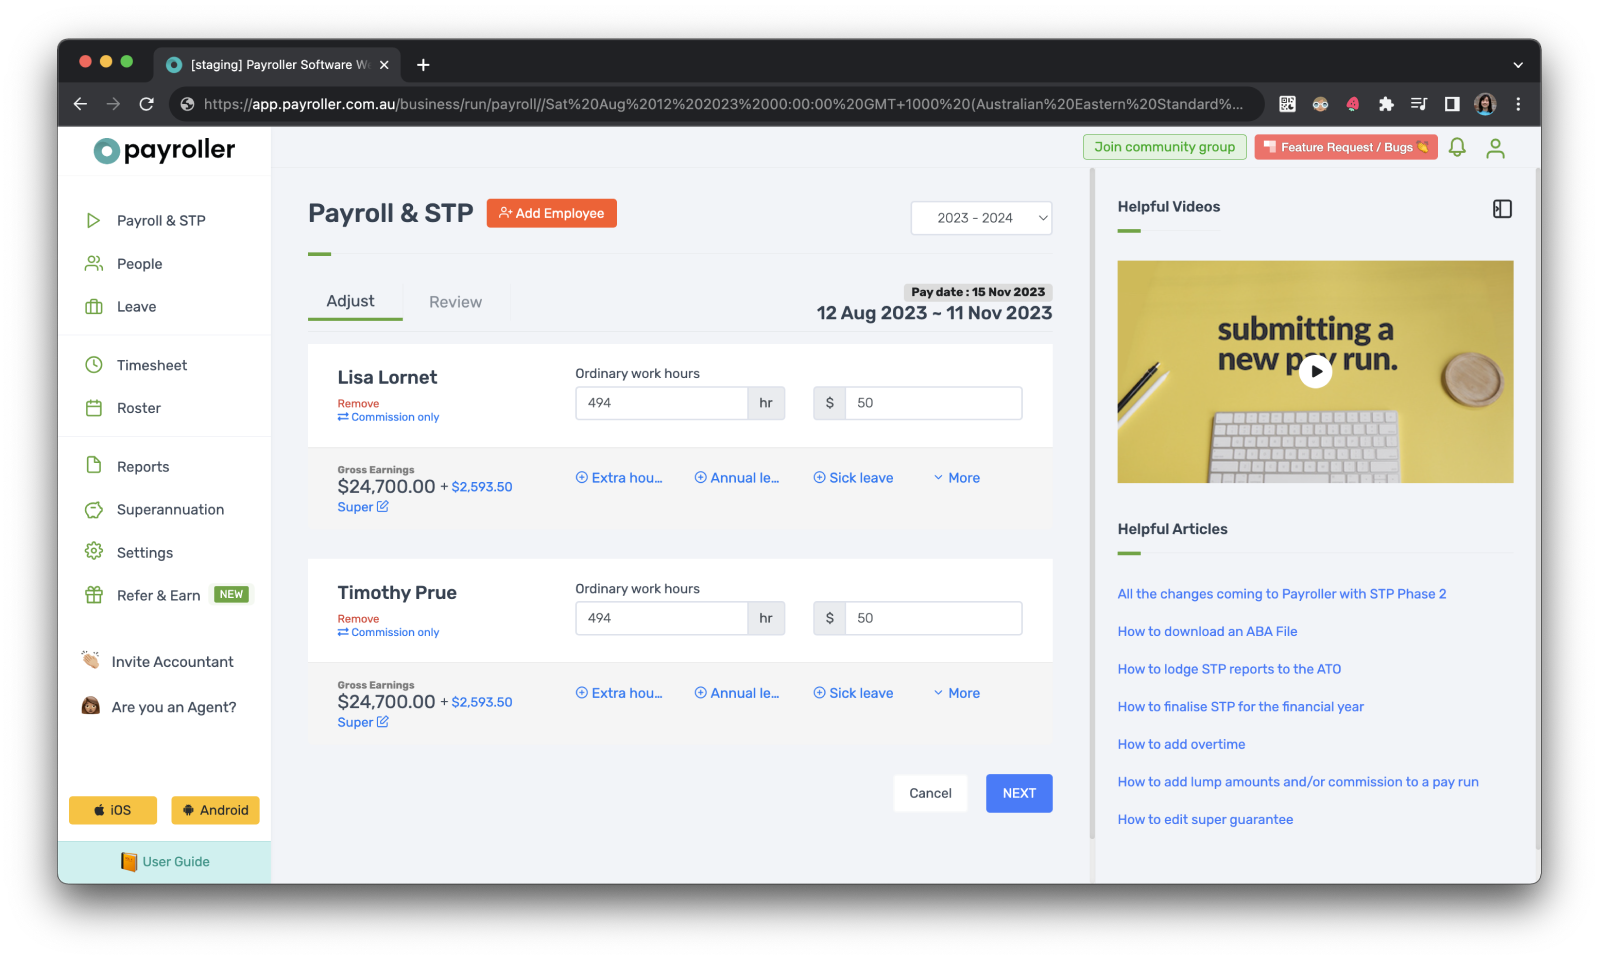 Payroller functions - Setting up employees on different pay periods - 11